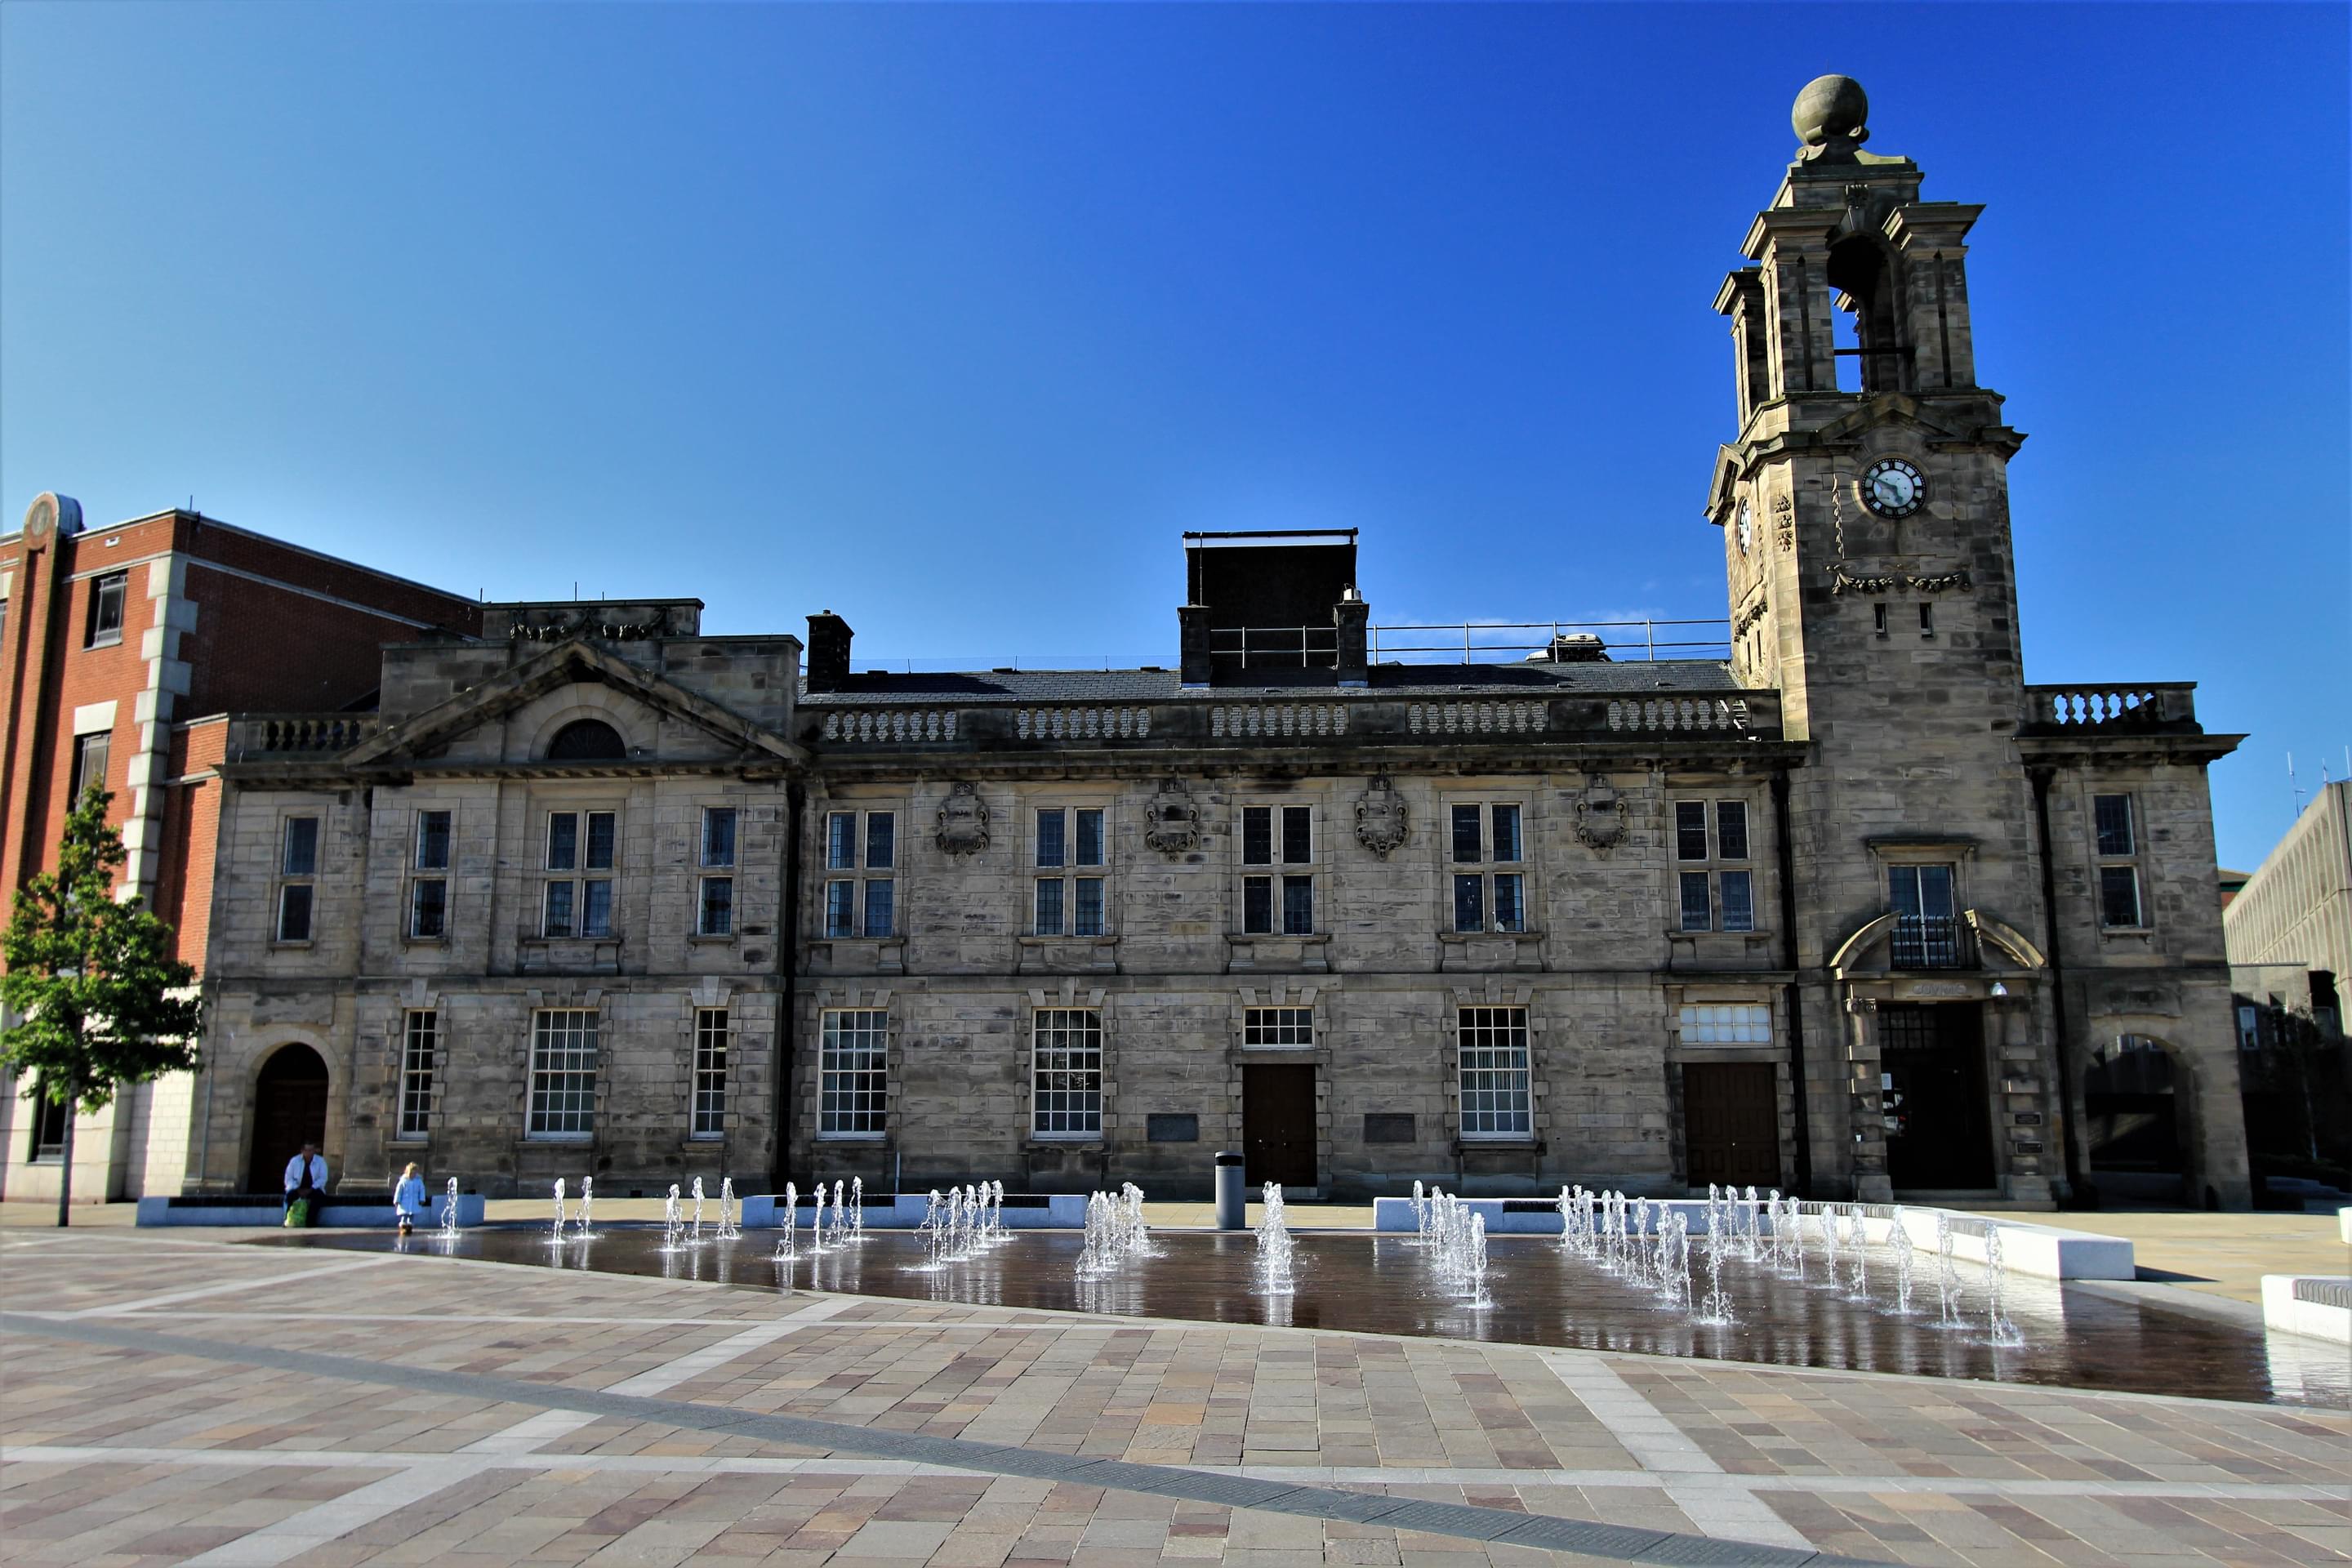 Keel Square Overview